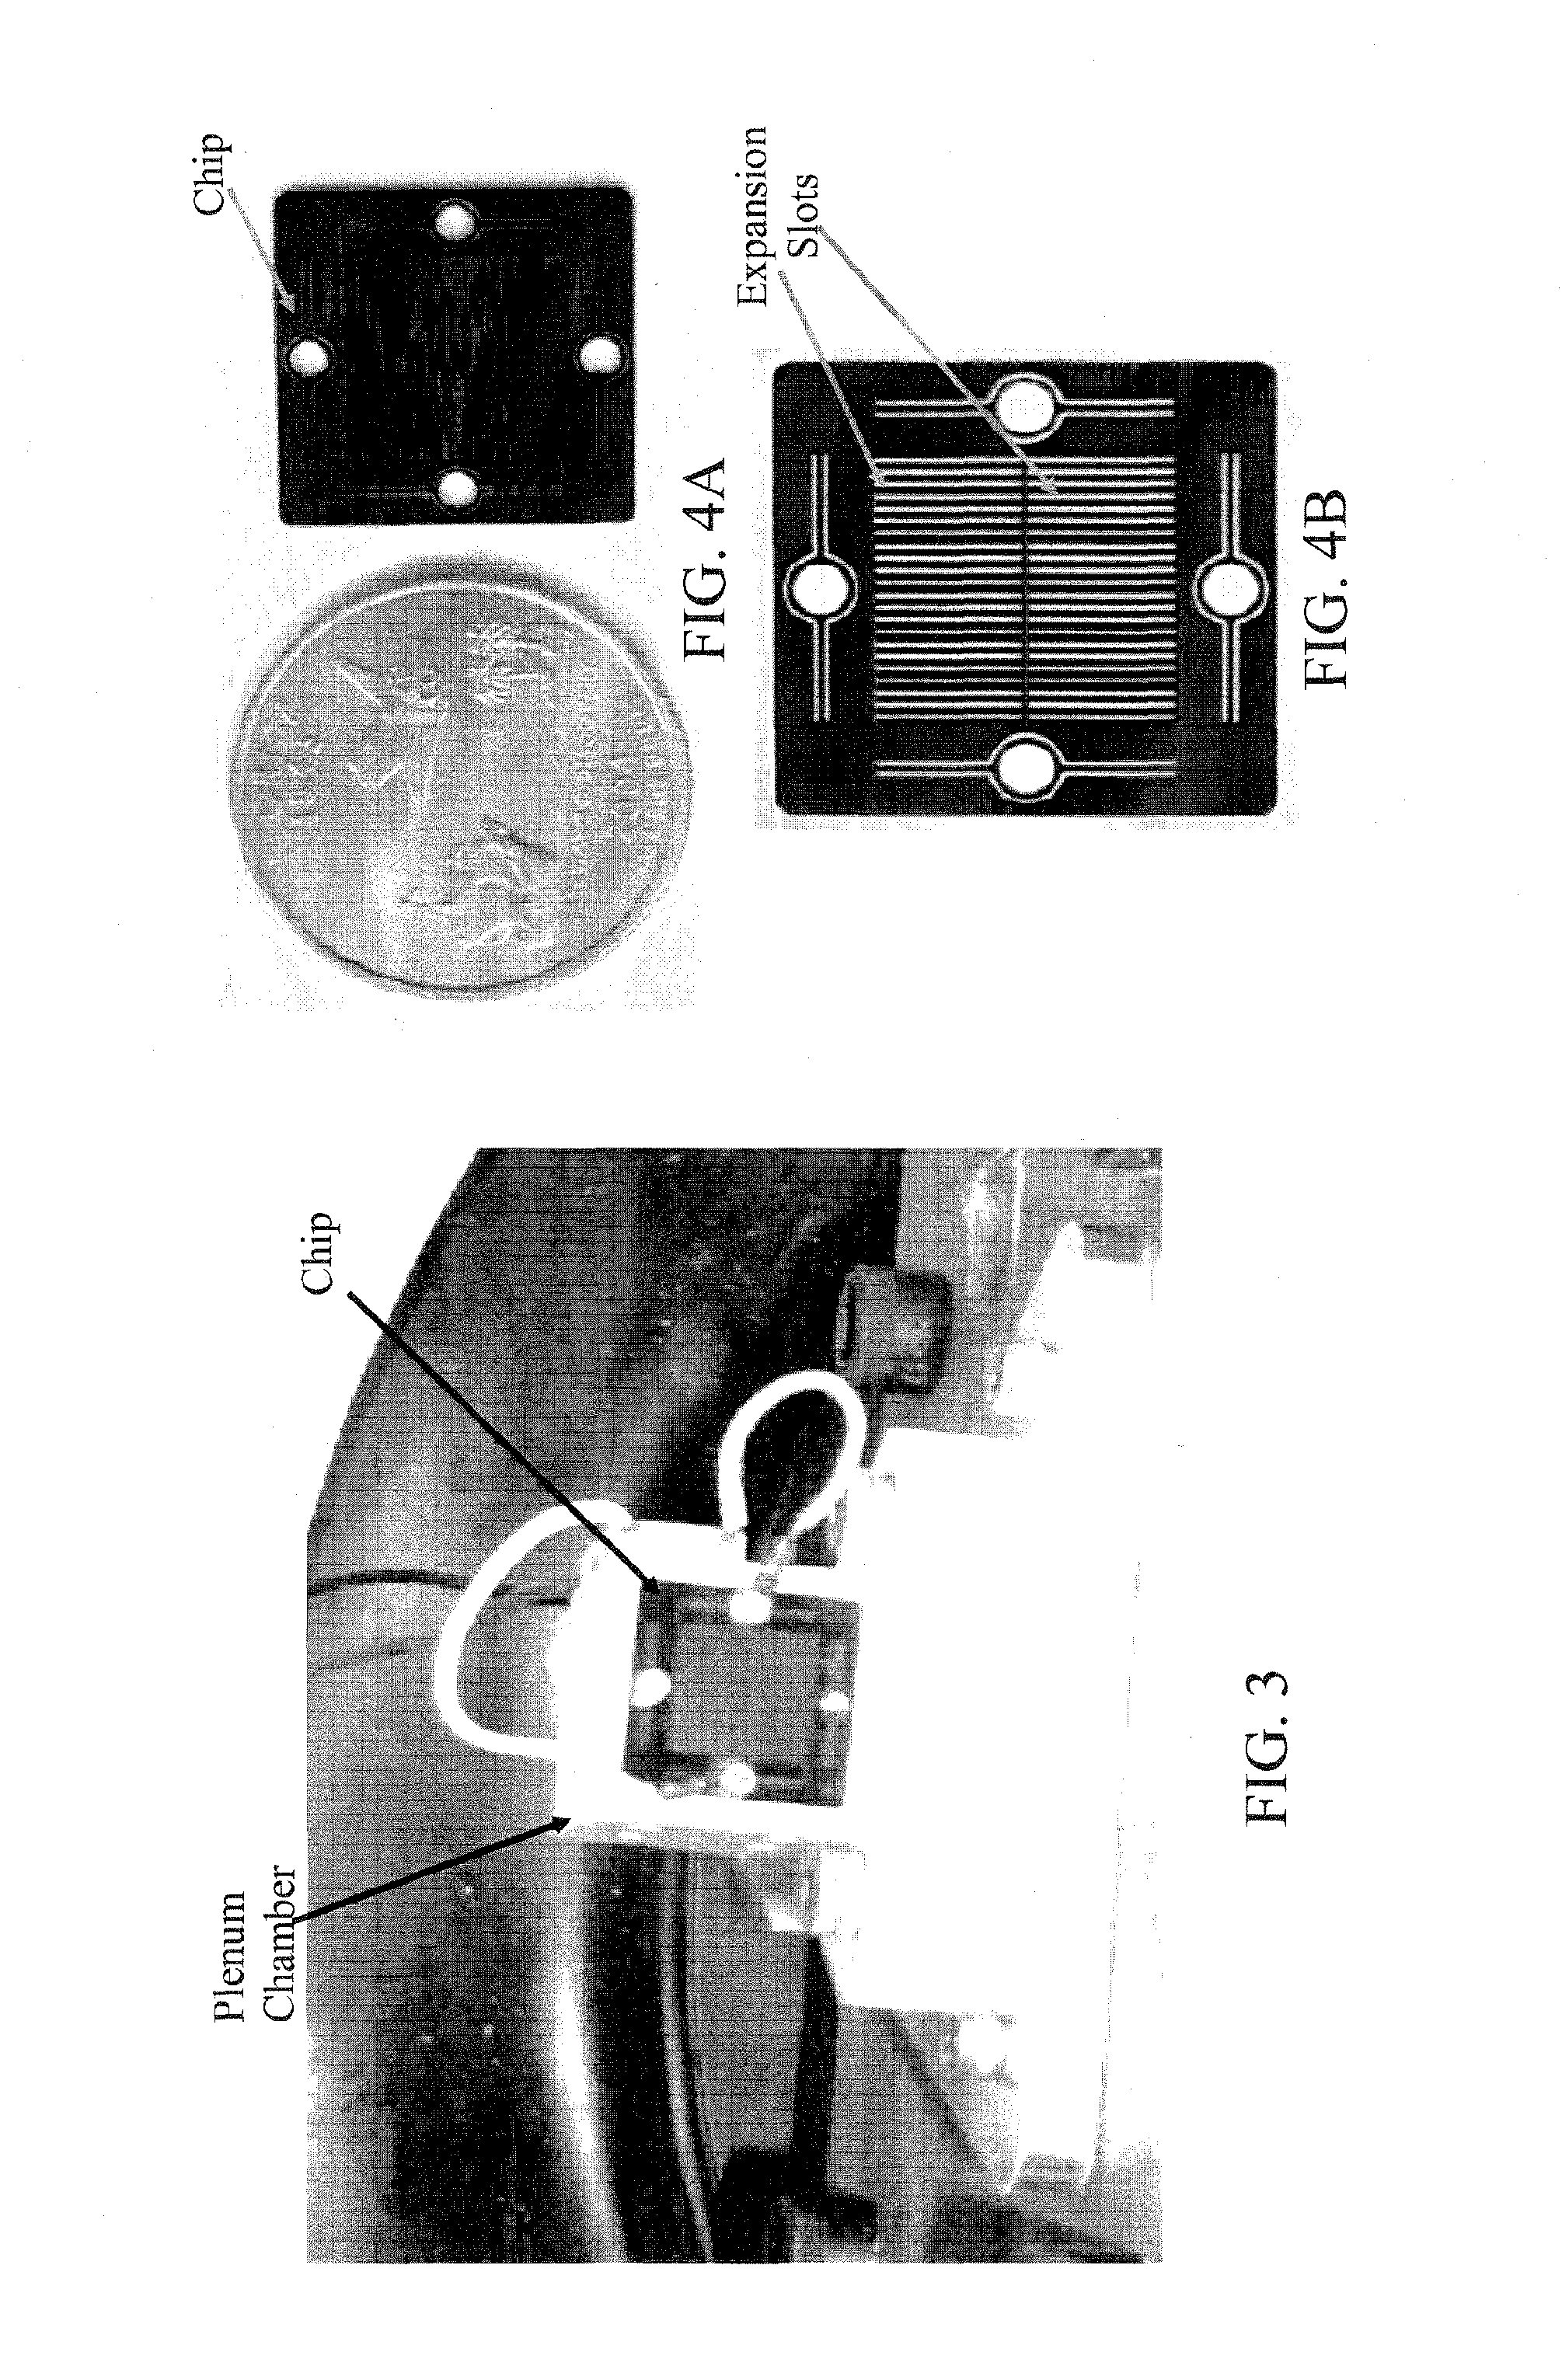 Method and apparatus for small satellite propulsion